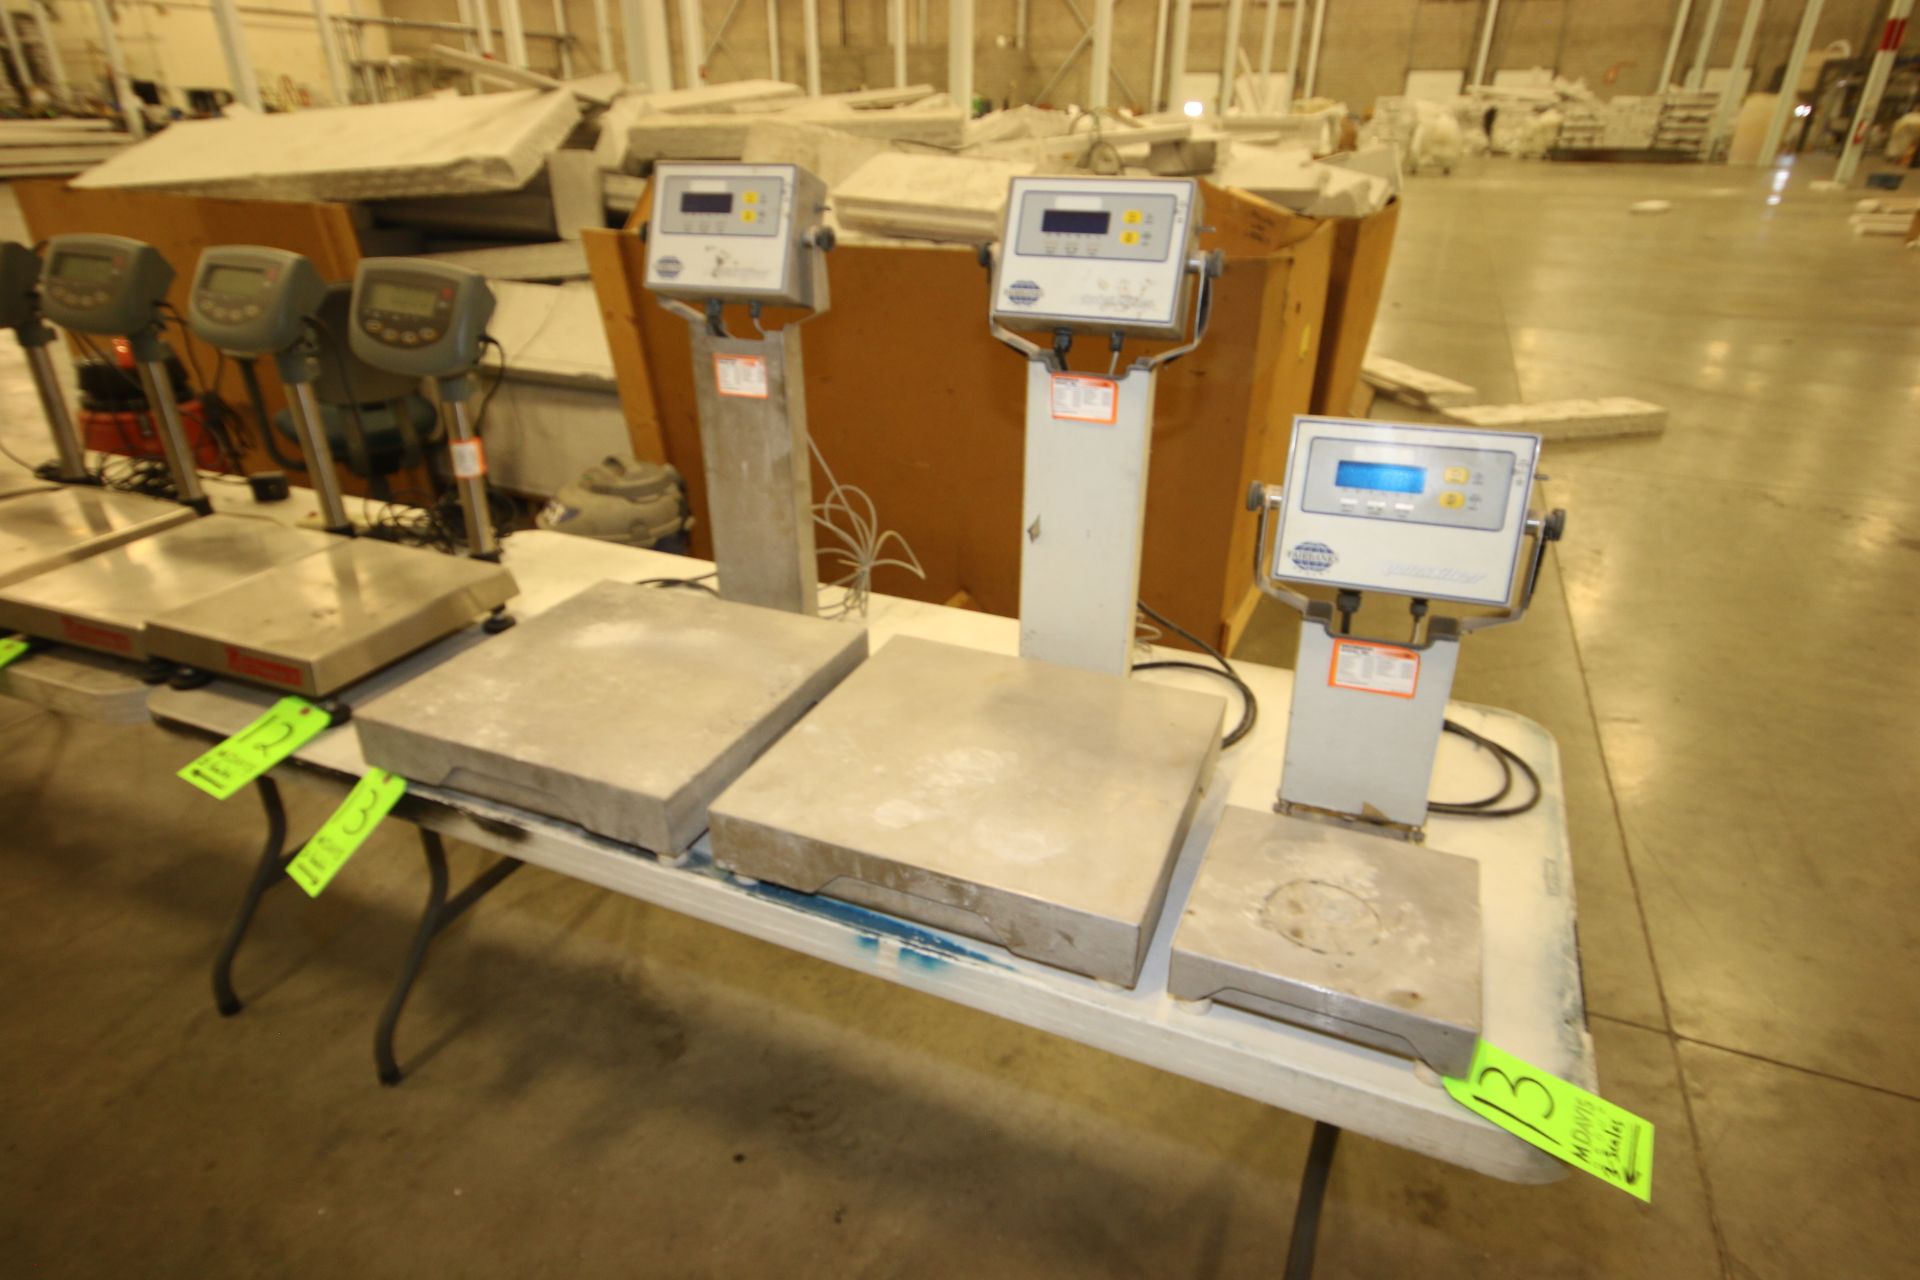 Fairbanks Digital Platform Scales, M/N IND-HR5000-1A, 2-with 18" L x 18" W S/S Platforms, and 1-with - Image 2 of 5